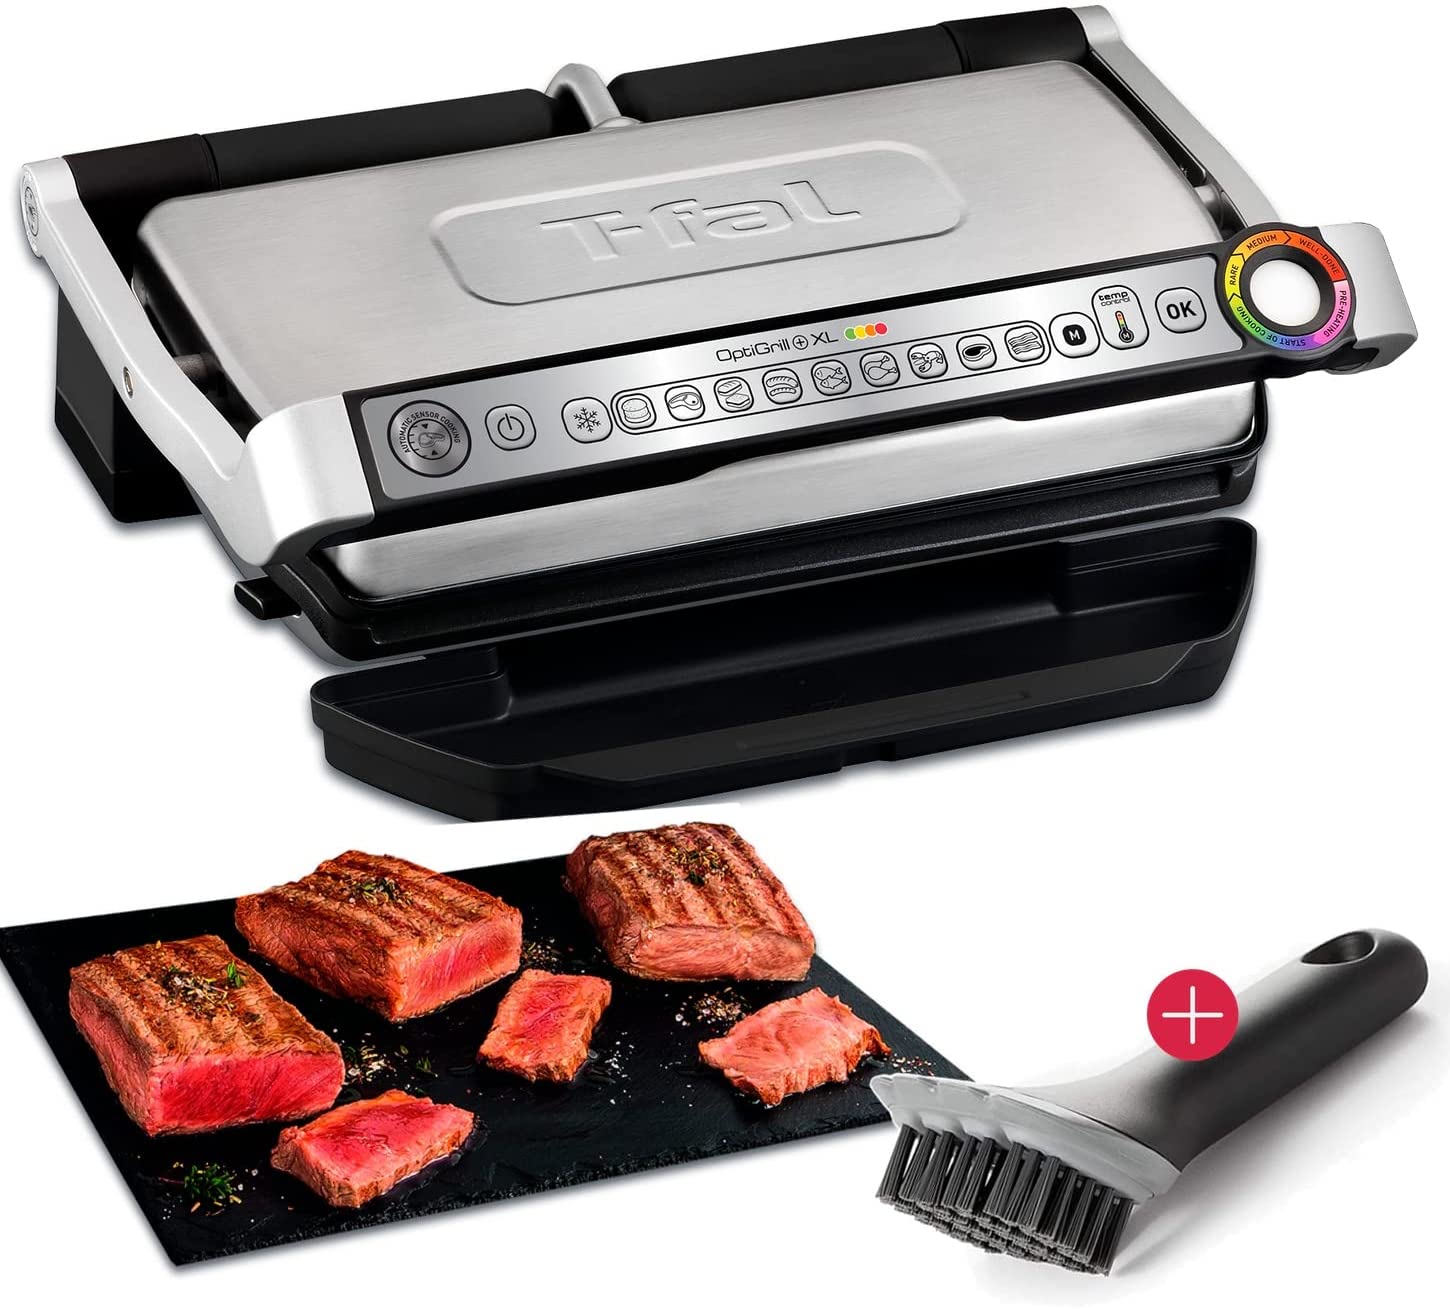 Tefal OptiGrill+ XL Electric Contact Grill + Cleaning Grill Brush, 9 Automatic Grill Programmes, Indoor Electric Grill, Ideal Grilling Results, Non-Stick Cast Aluminium Plates, Stainless Steel